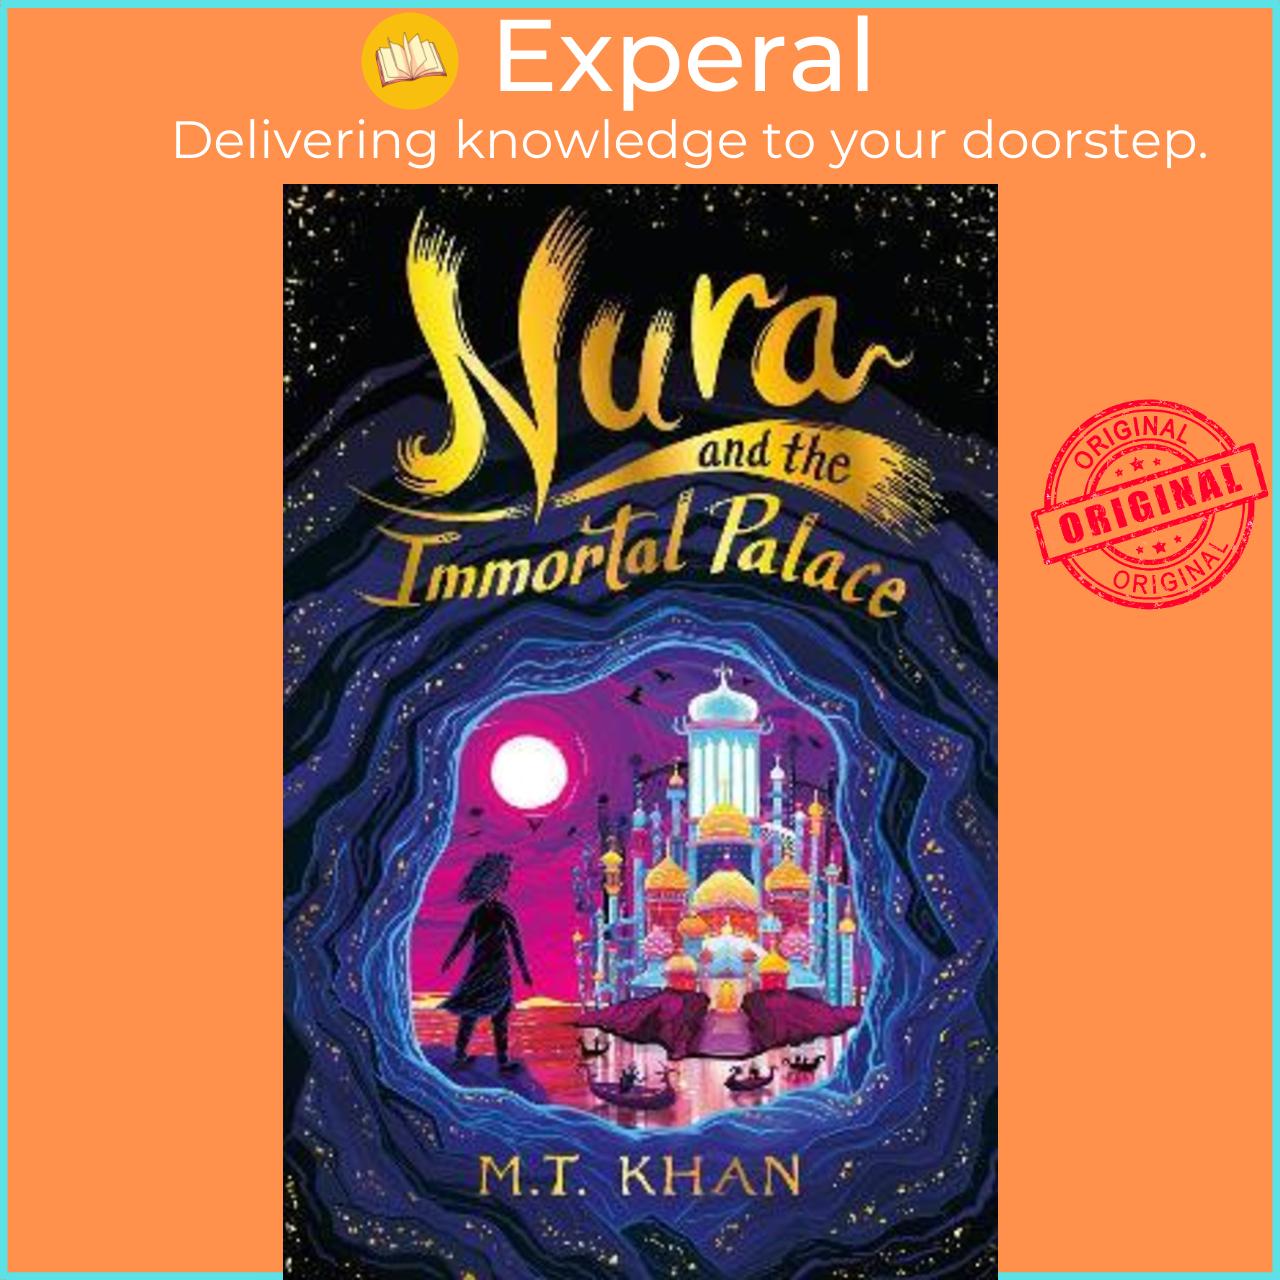 Sách - Nura and the Immortal Palace by M. T. Khan (UK edition, paperback)